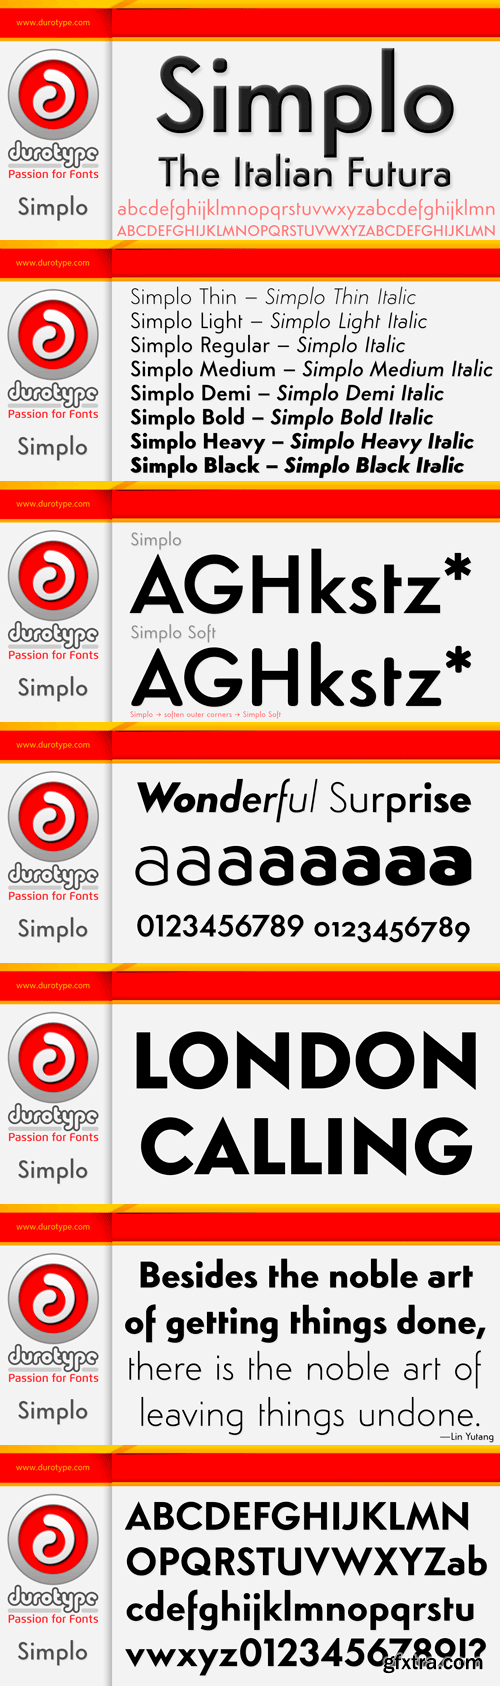 Simplo Font Family - 16 Fonts for $279